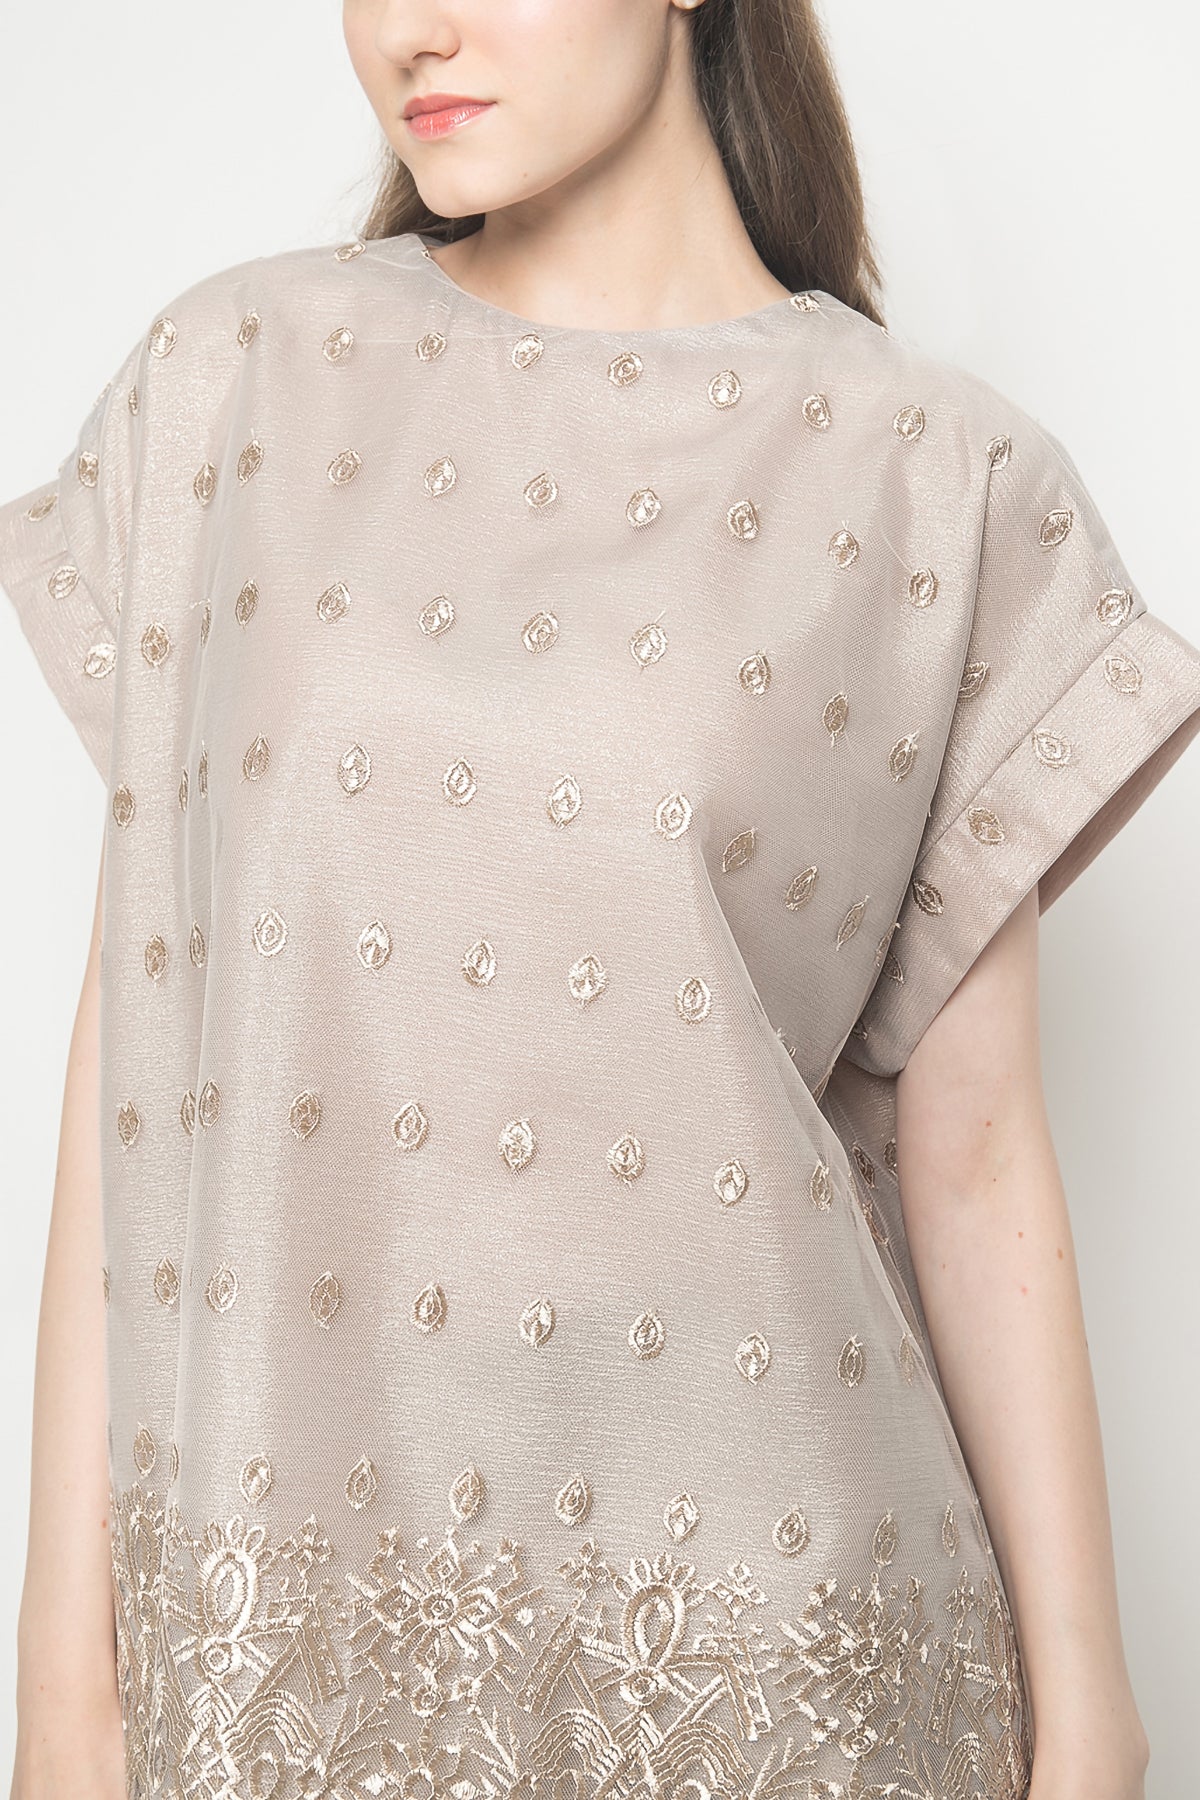 New Asha Top in Taupe Grey